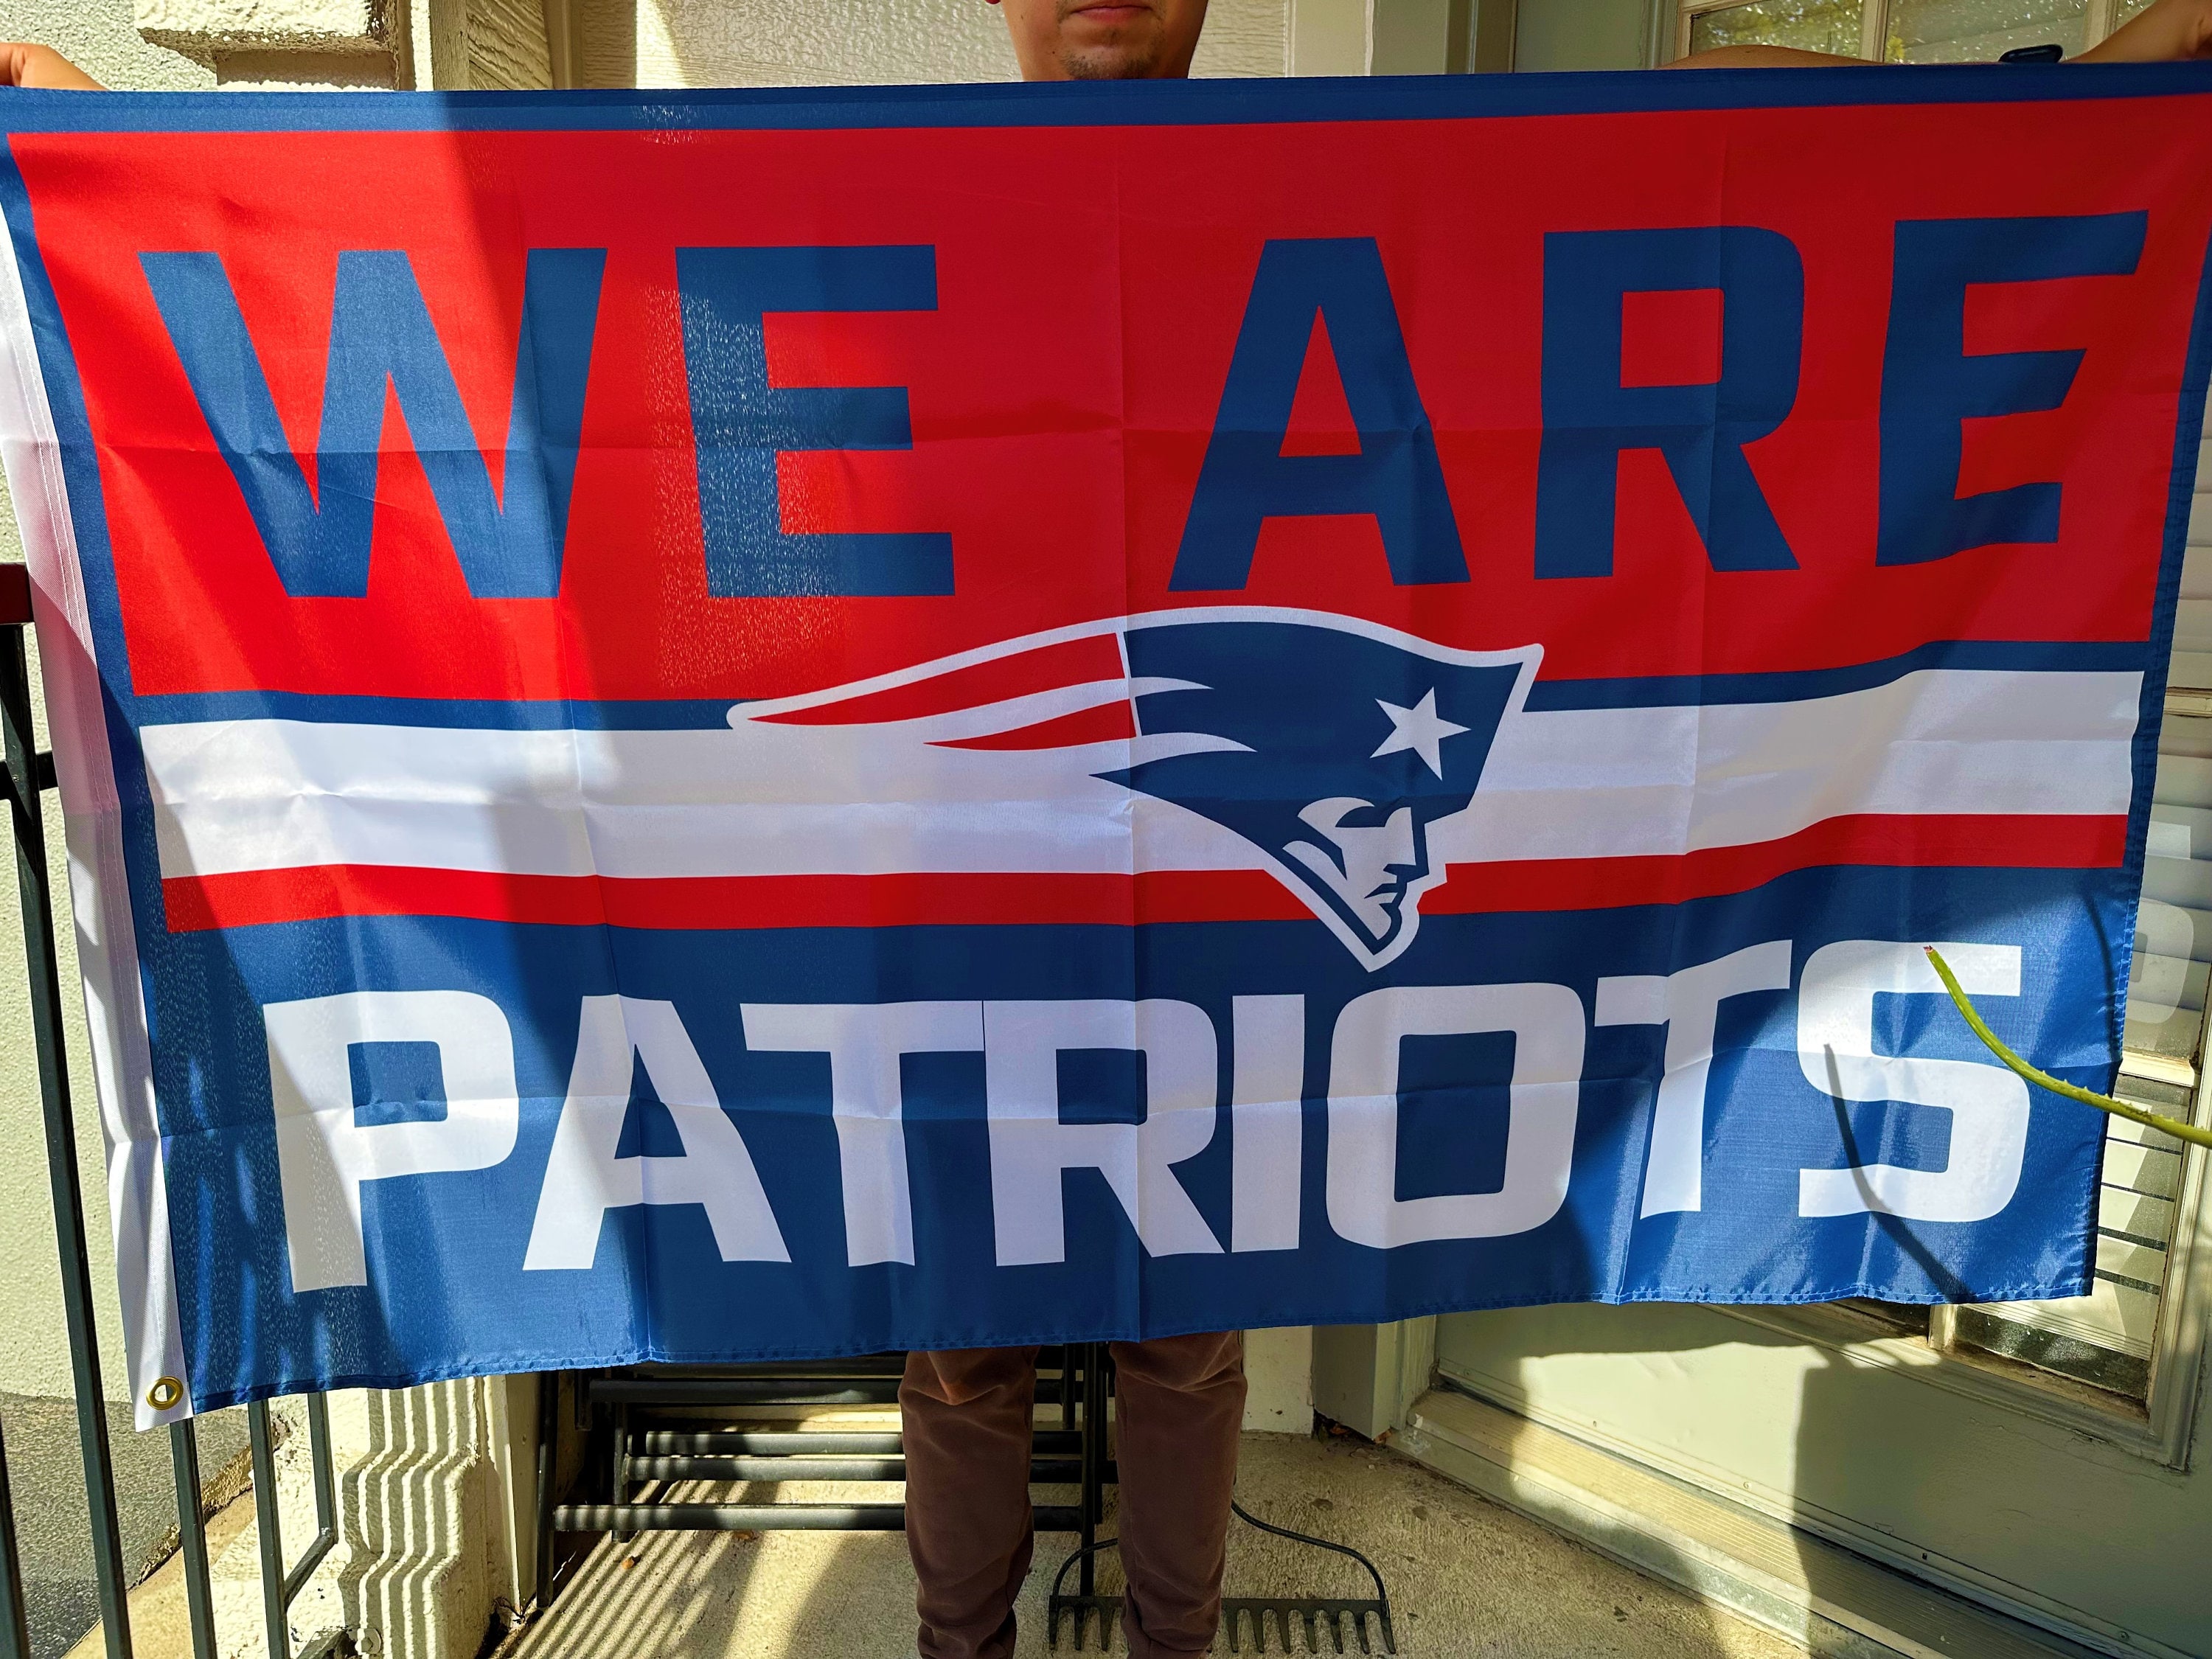 New England Patriots Flag 3X5 Banner American Football NFL FAST FREE  Shipping